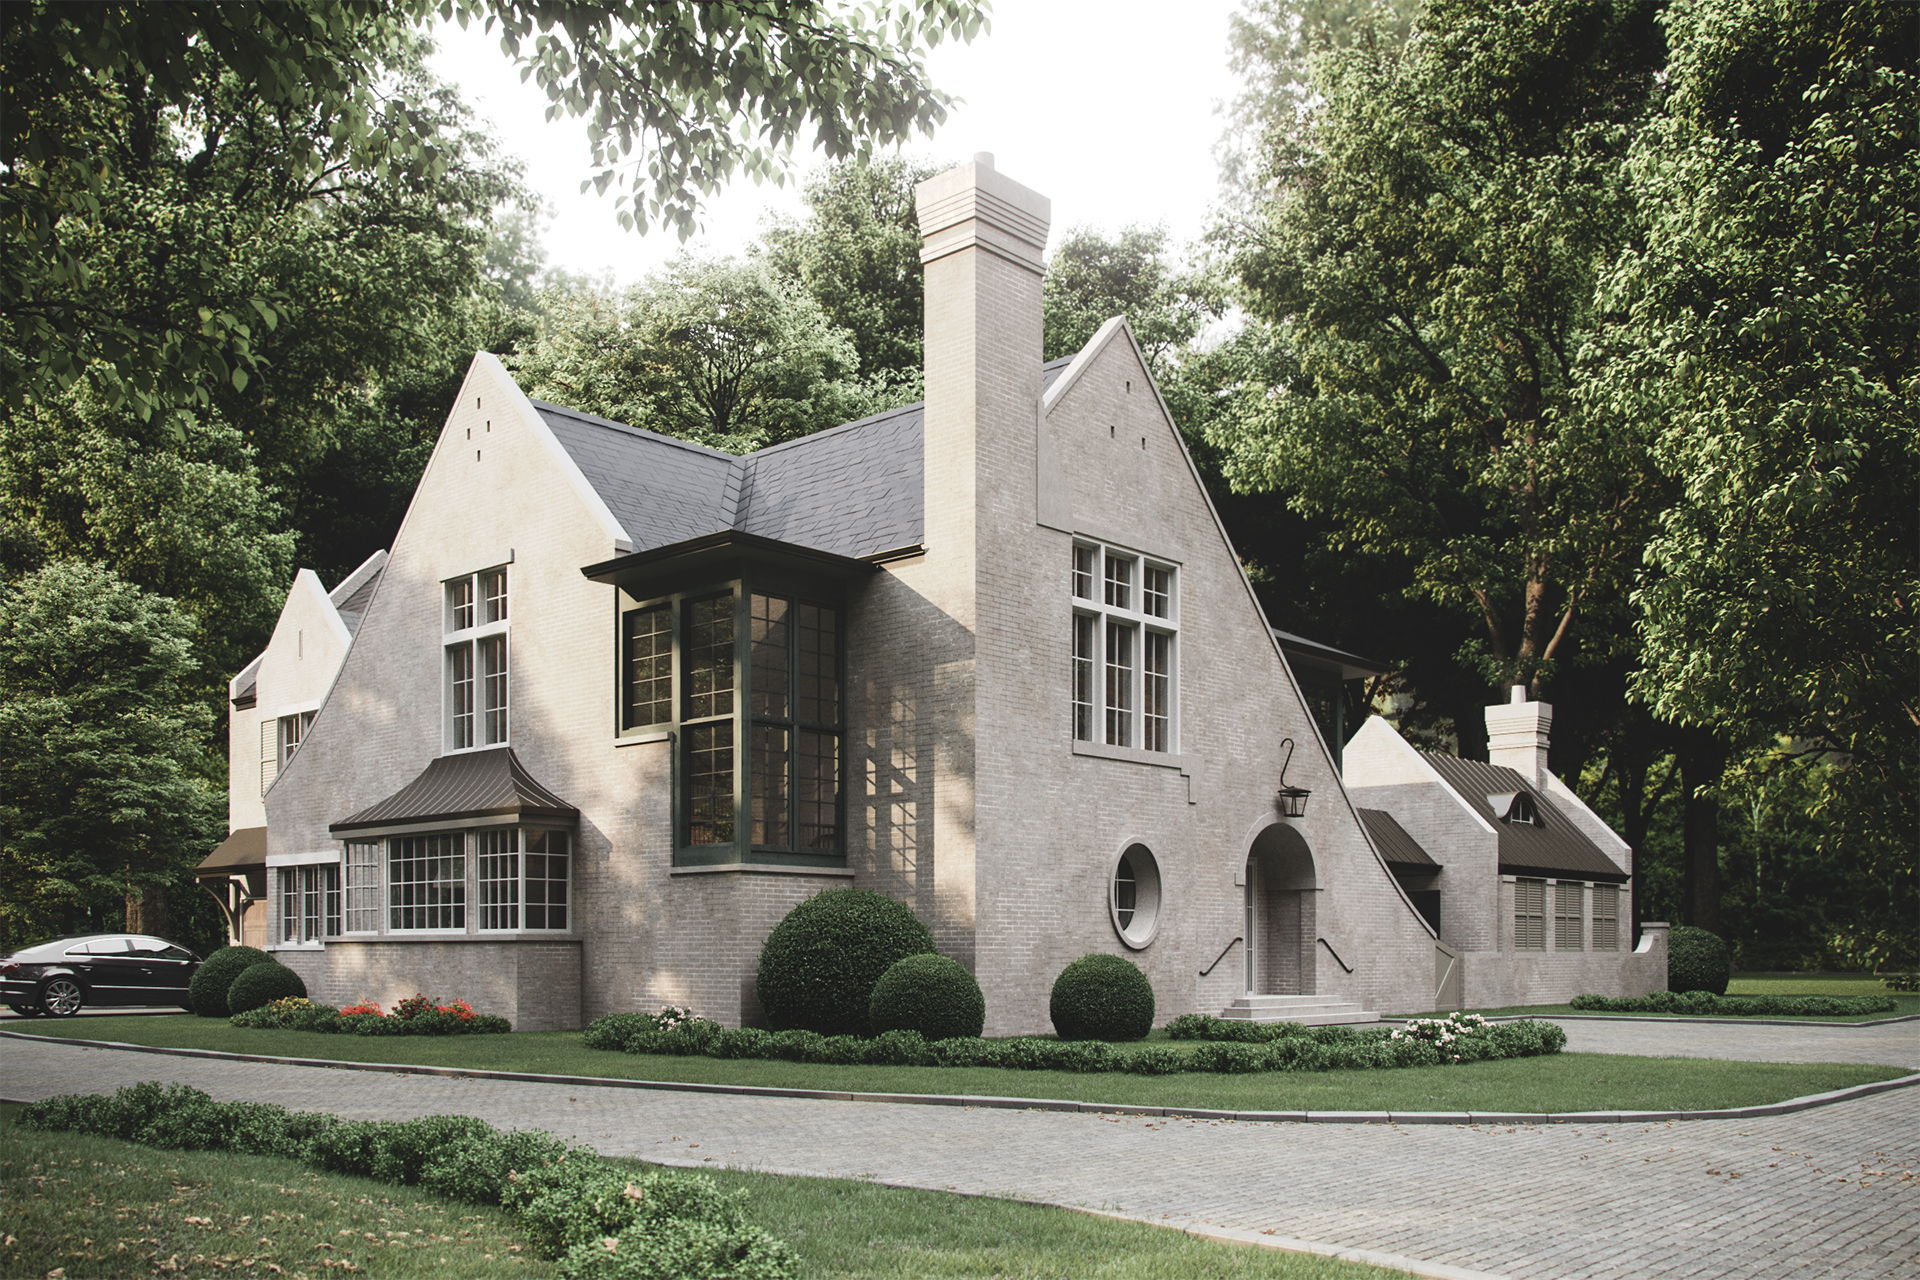 Photorealistic 3D Visualization of a Cottage